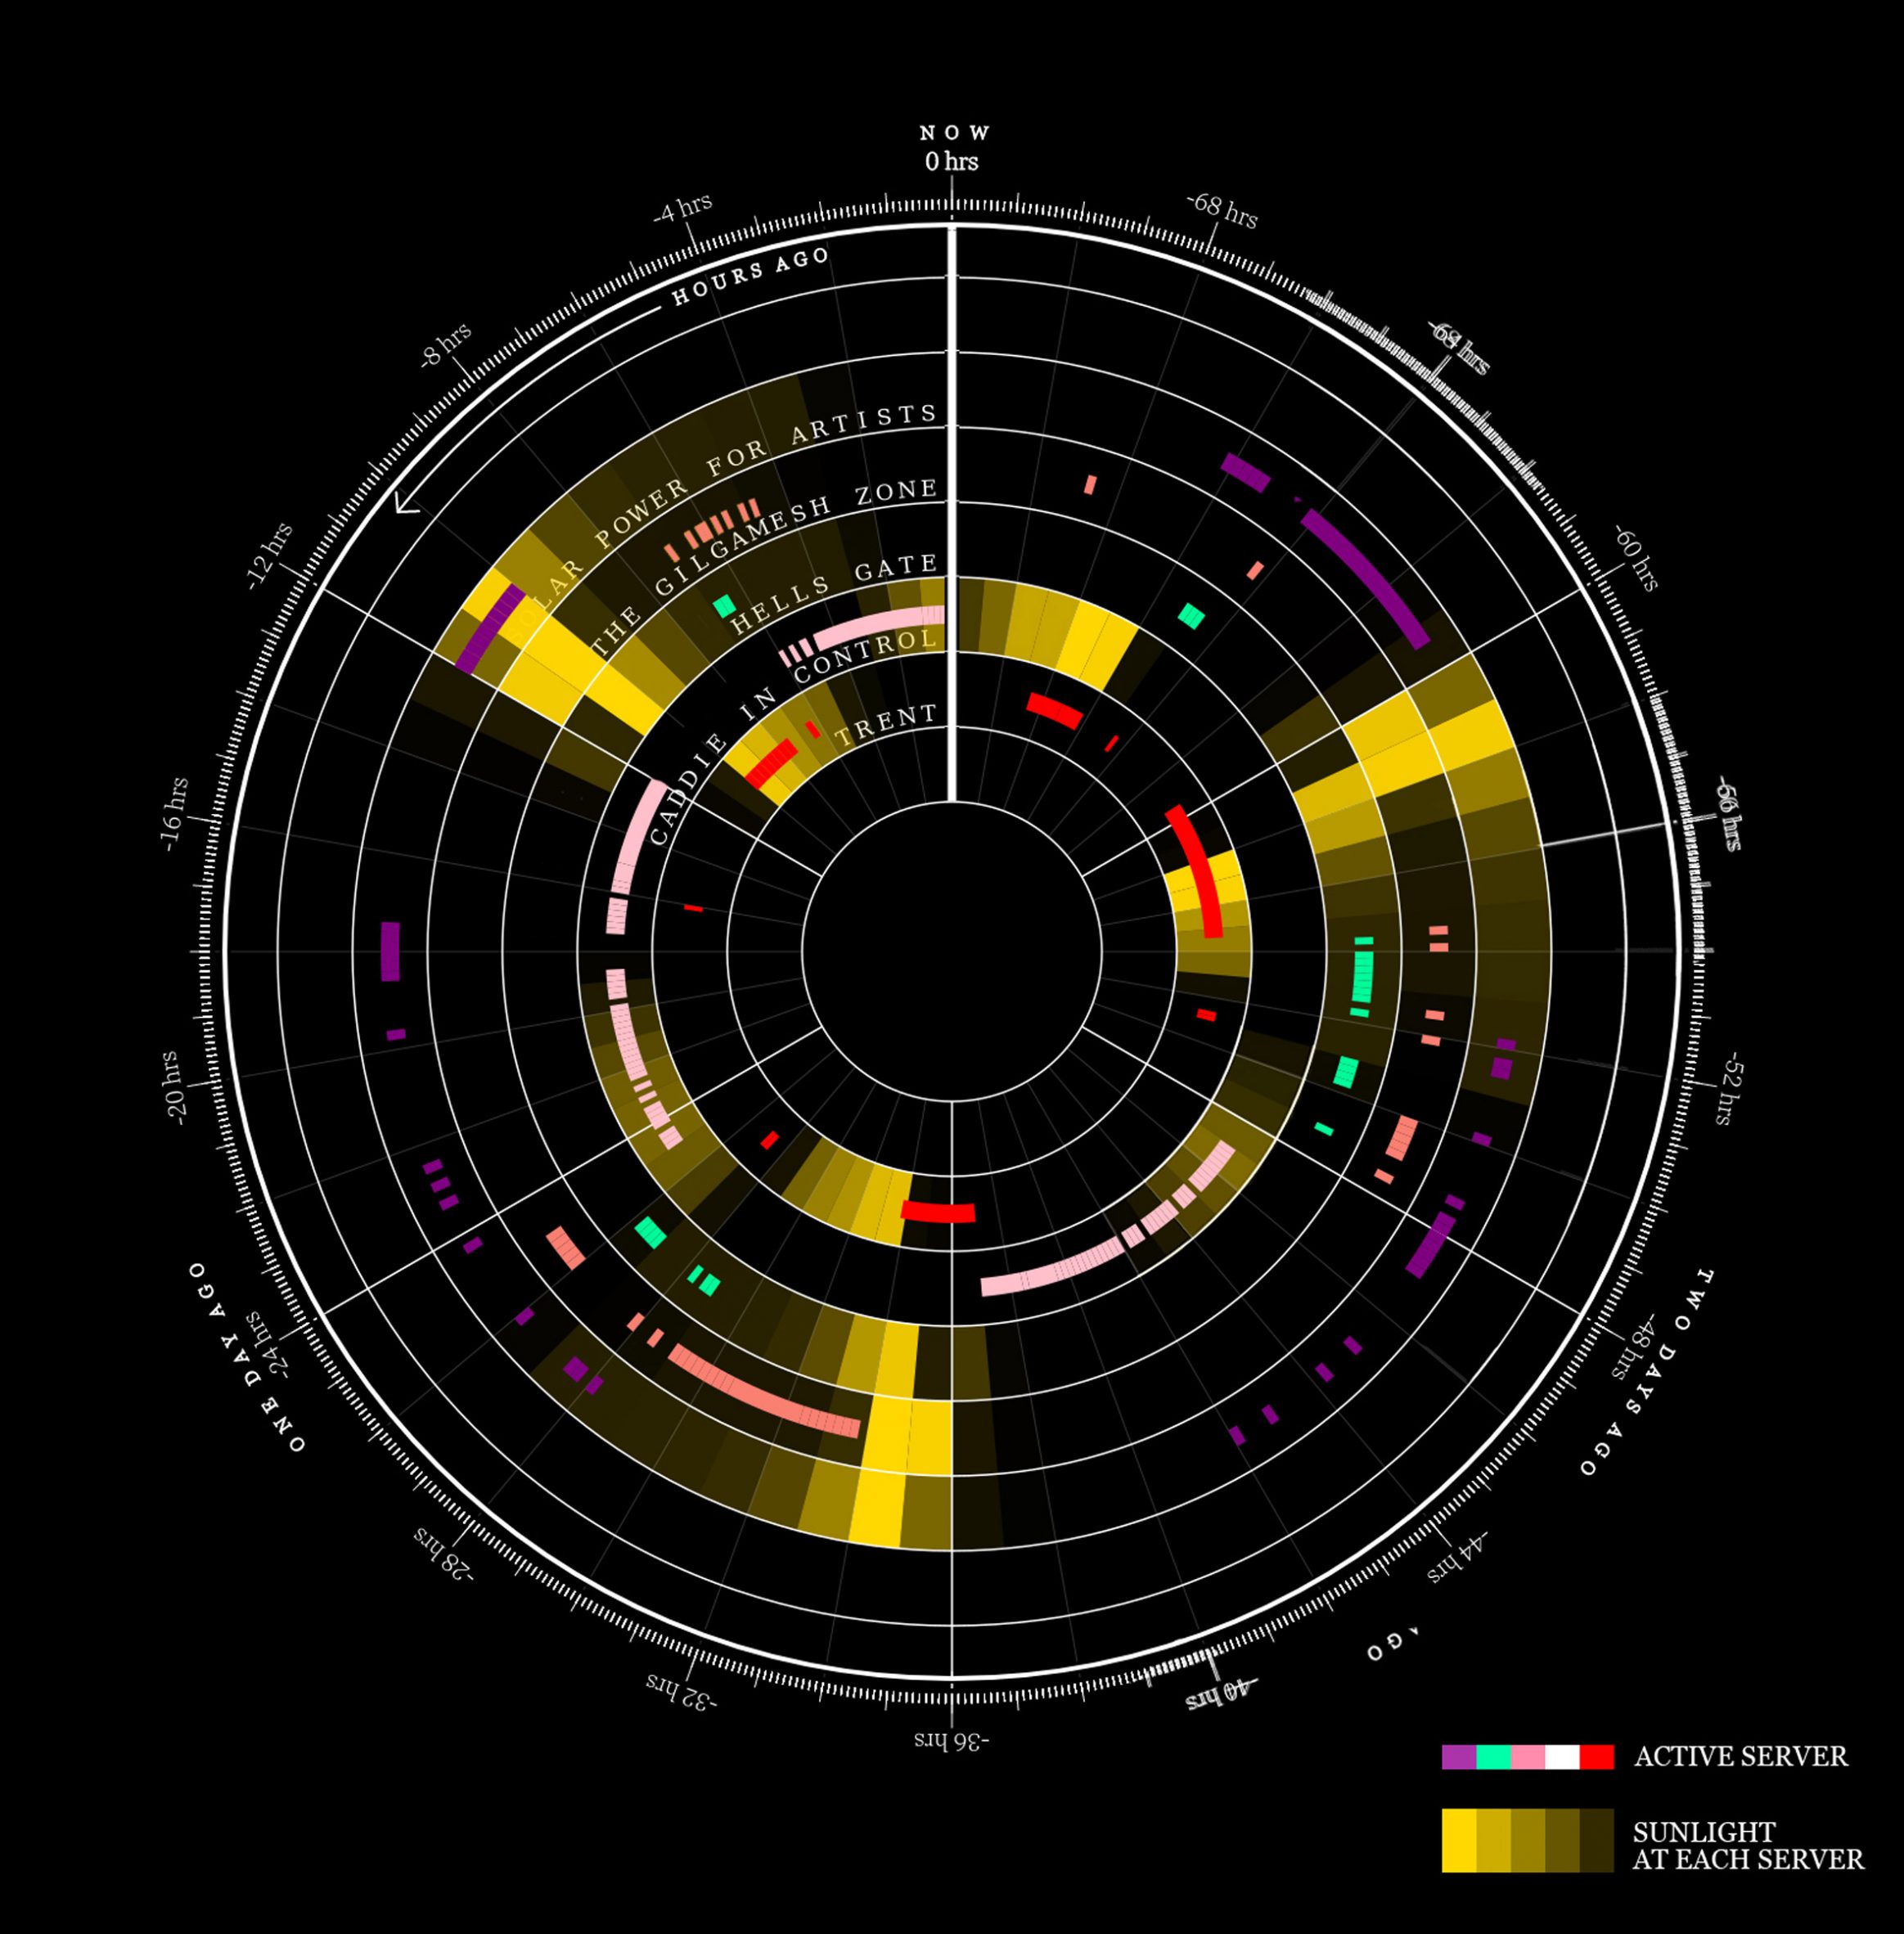 Circular data visualisation showing which servers have received sunlight and when they've been active